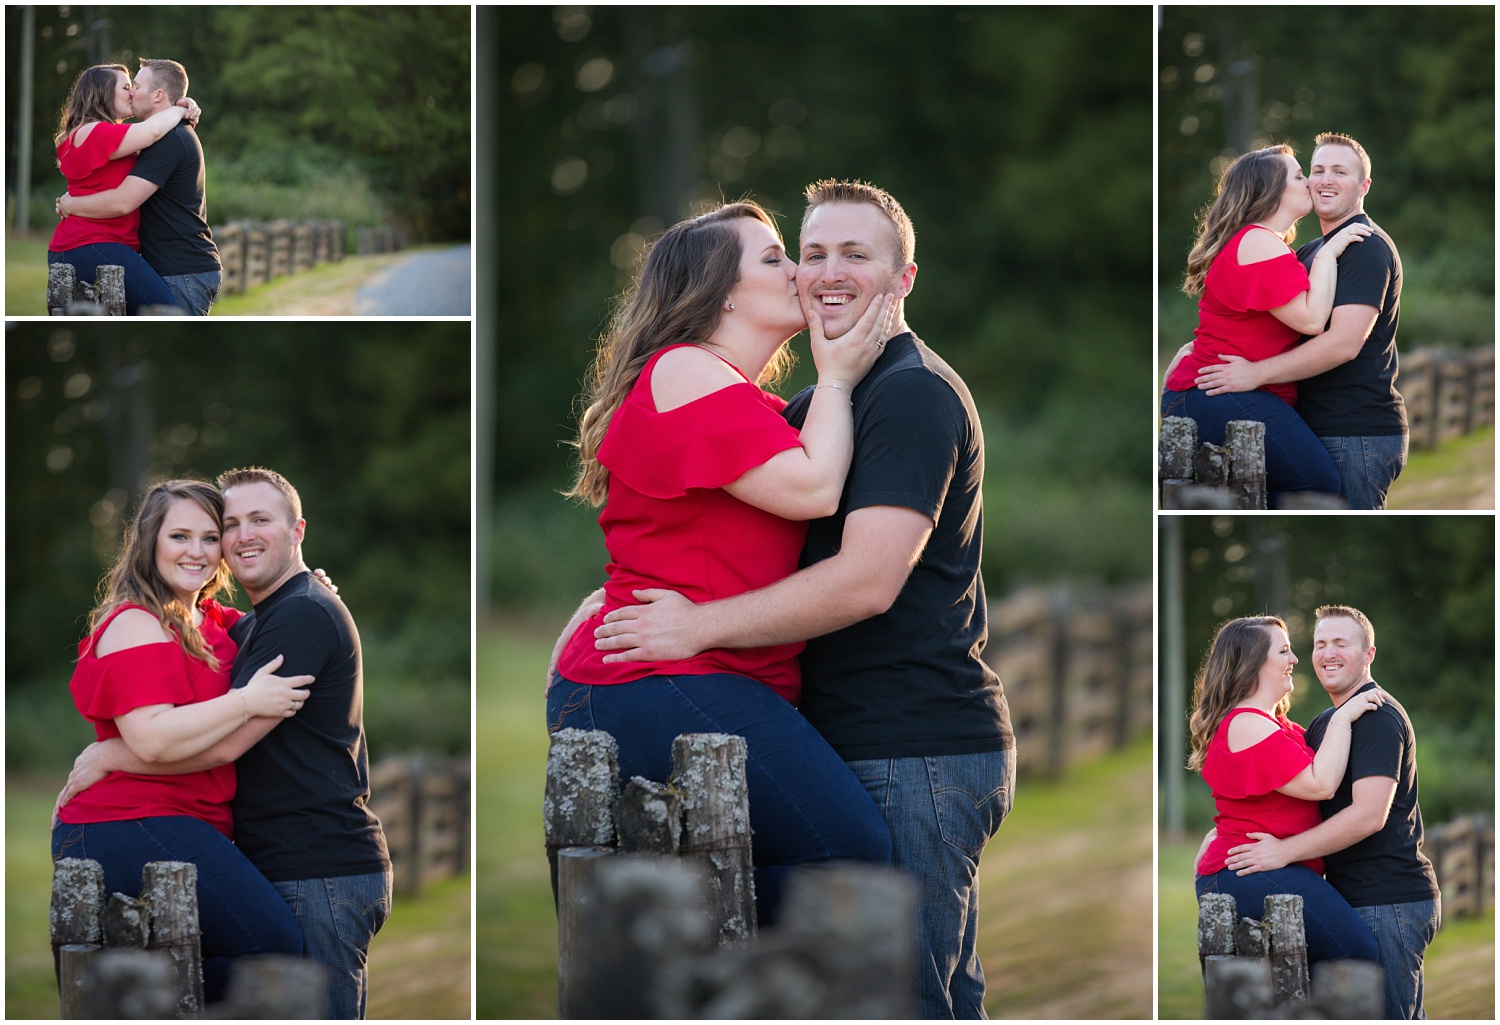 Amazing Day Photography - Langley Engagement Photographer - Compbell Valley Engagement Session (7).jpg